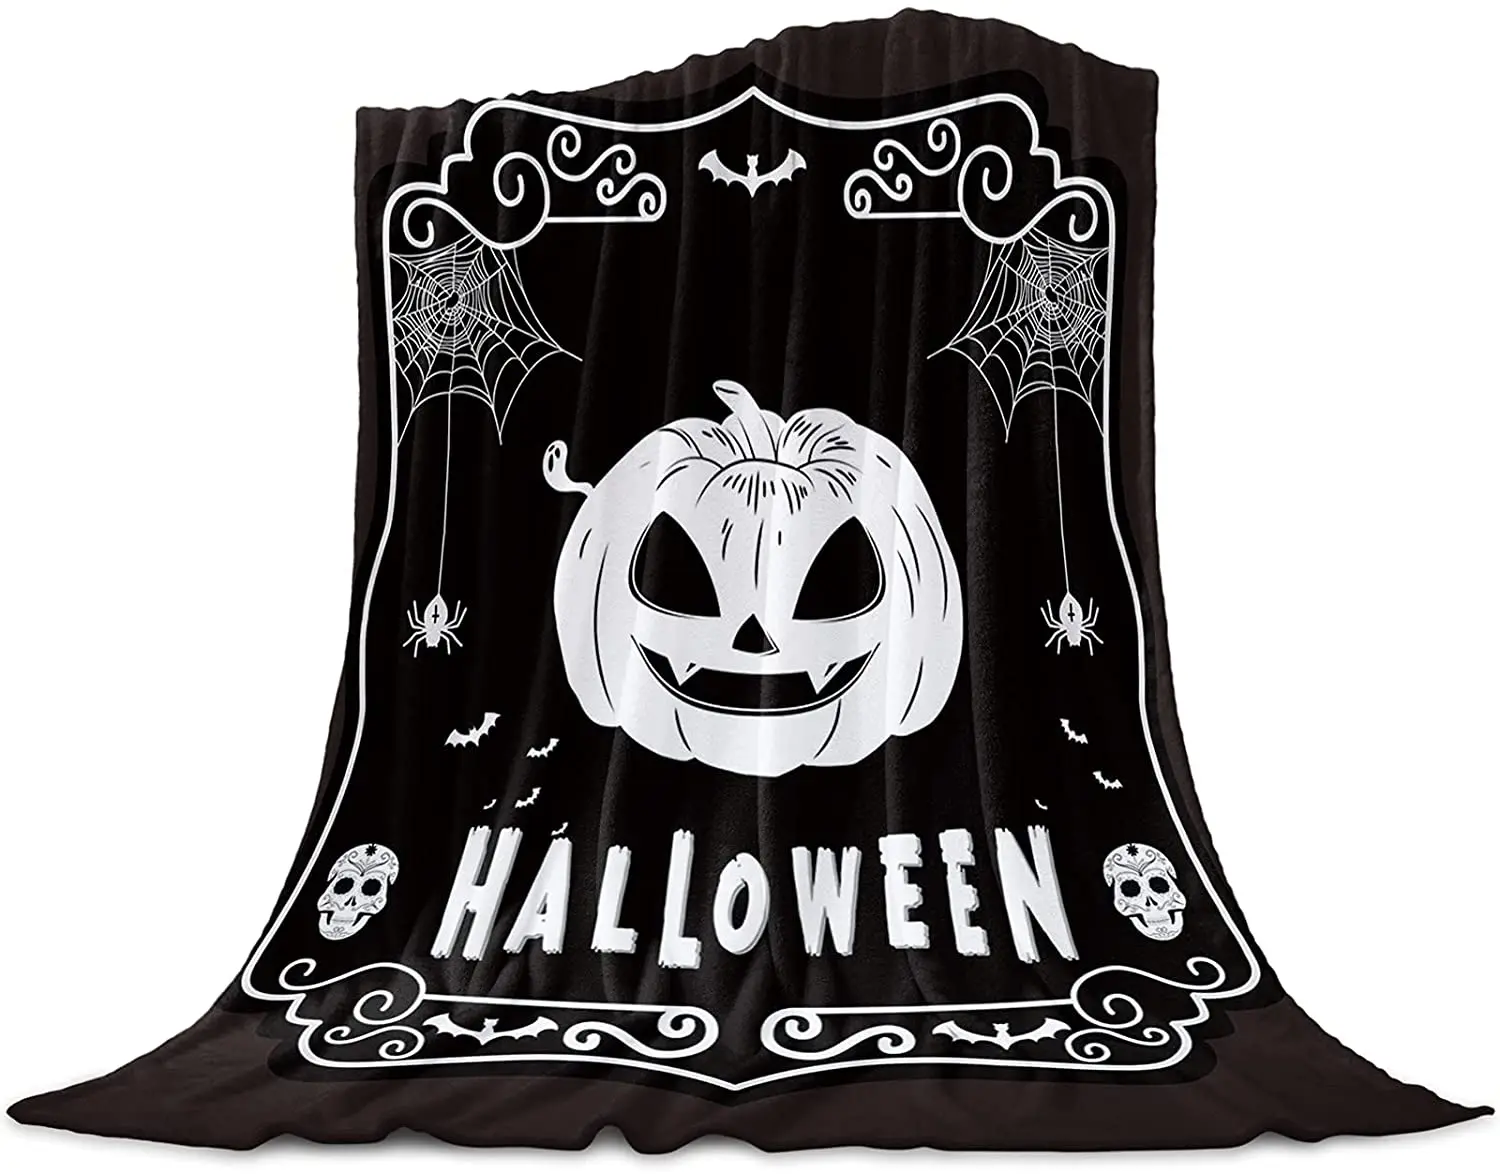 

Flannel Blankets and Throws for Couch Bed, Super Soft Cozy Lightweight Plush Throw Blanket,Halloween Bat Scary Pumpkin